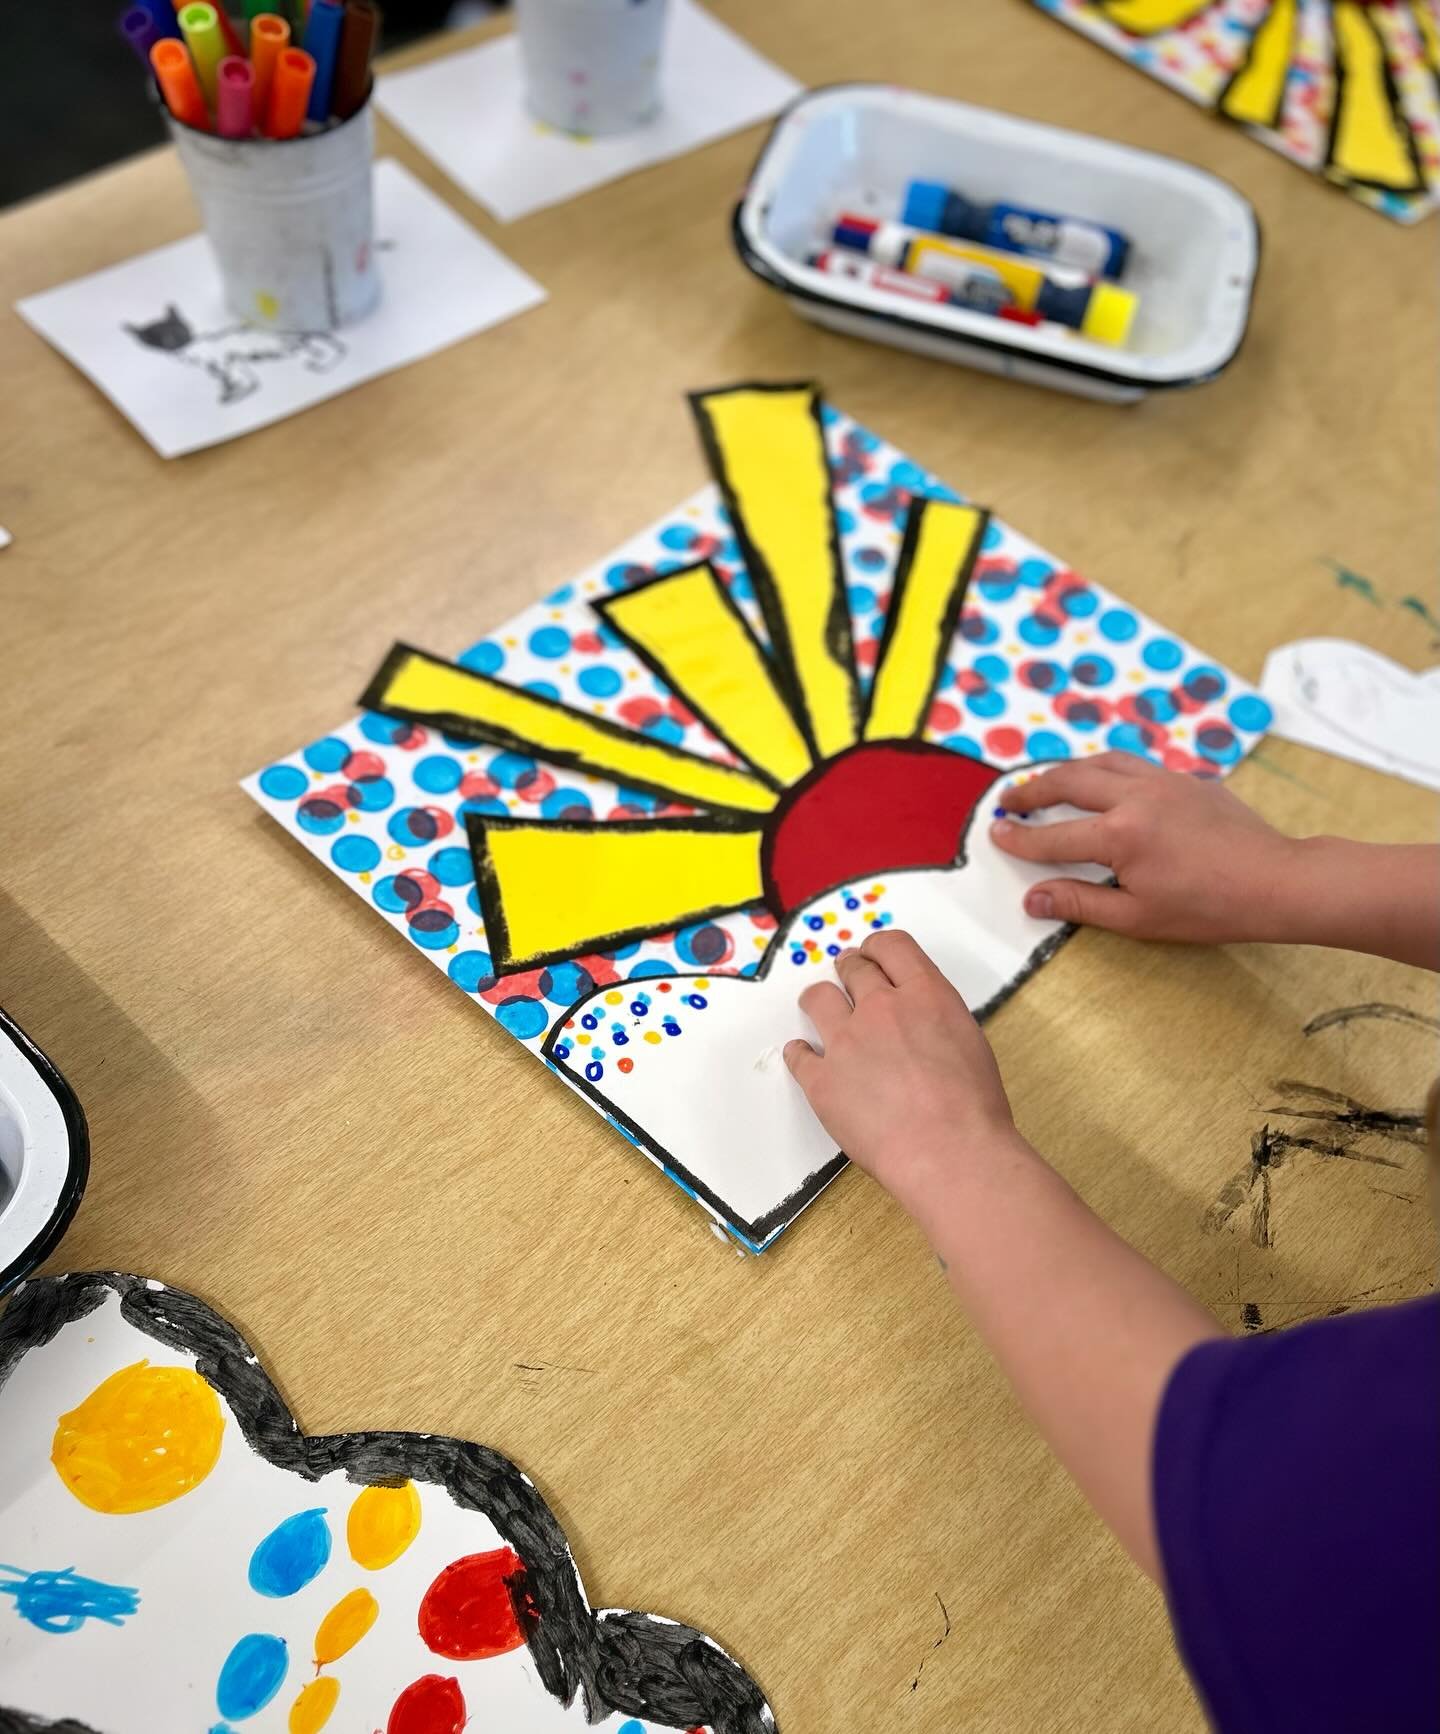 Sometimes the primary colors just POP ya know?! 💥These Roy Lichtenstein inspired collages turned out fantastic in all their dot and bold outline glory. Way to go K-3rd!